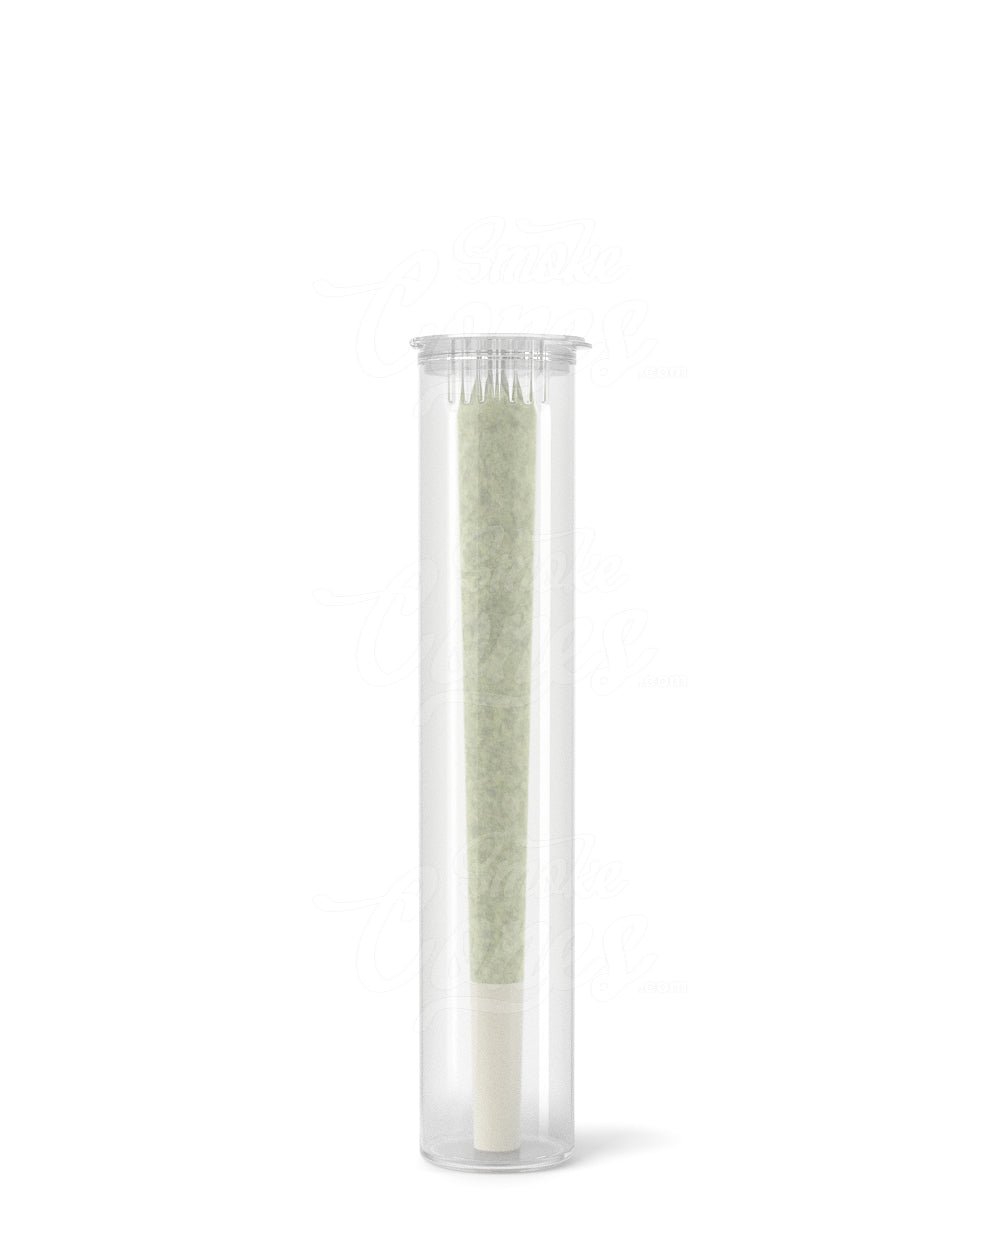 98mm Pre Roll Tubes and Joint Tubes